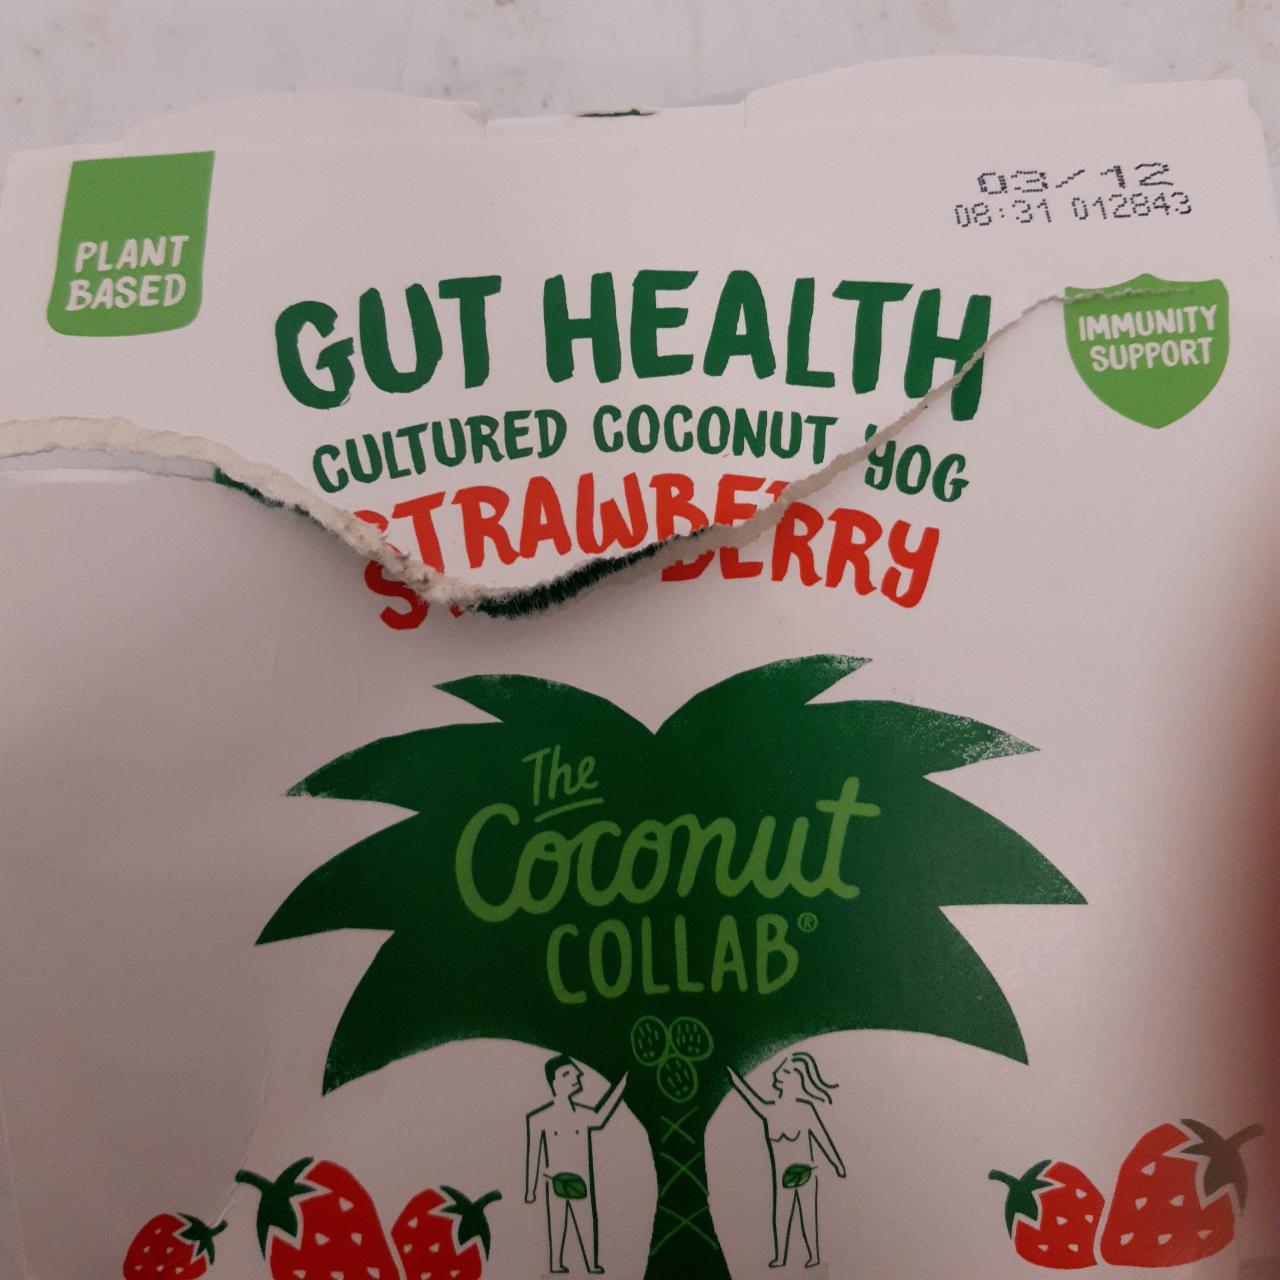 Fotografie - Gut Health cultured coconut strawberry The coconut collab